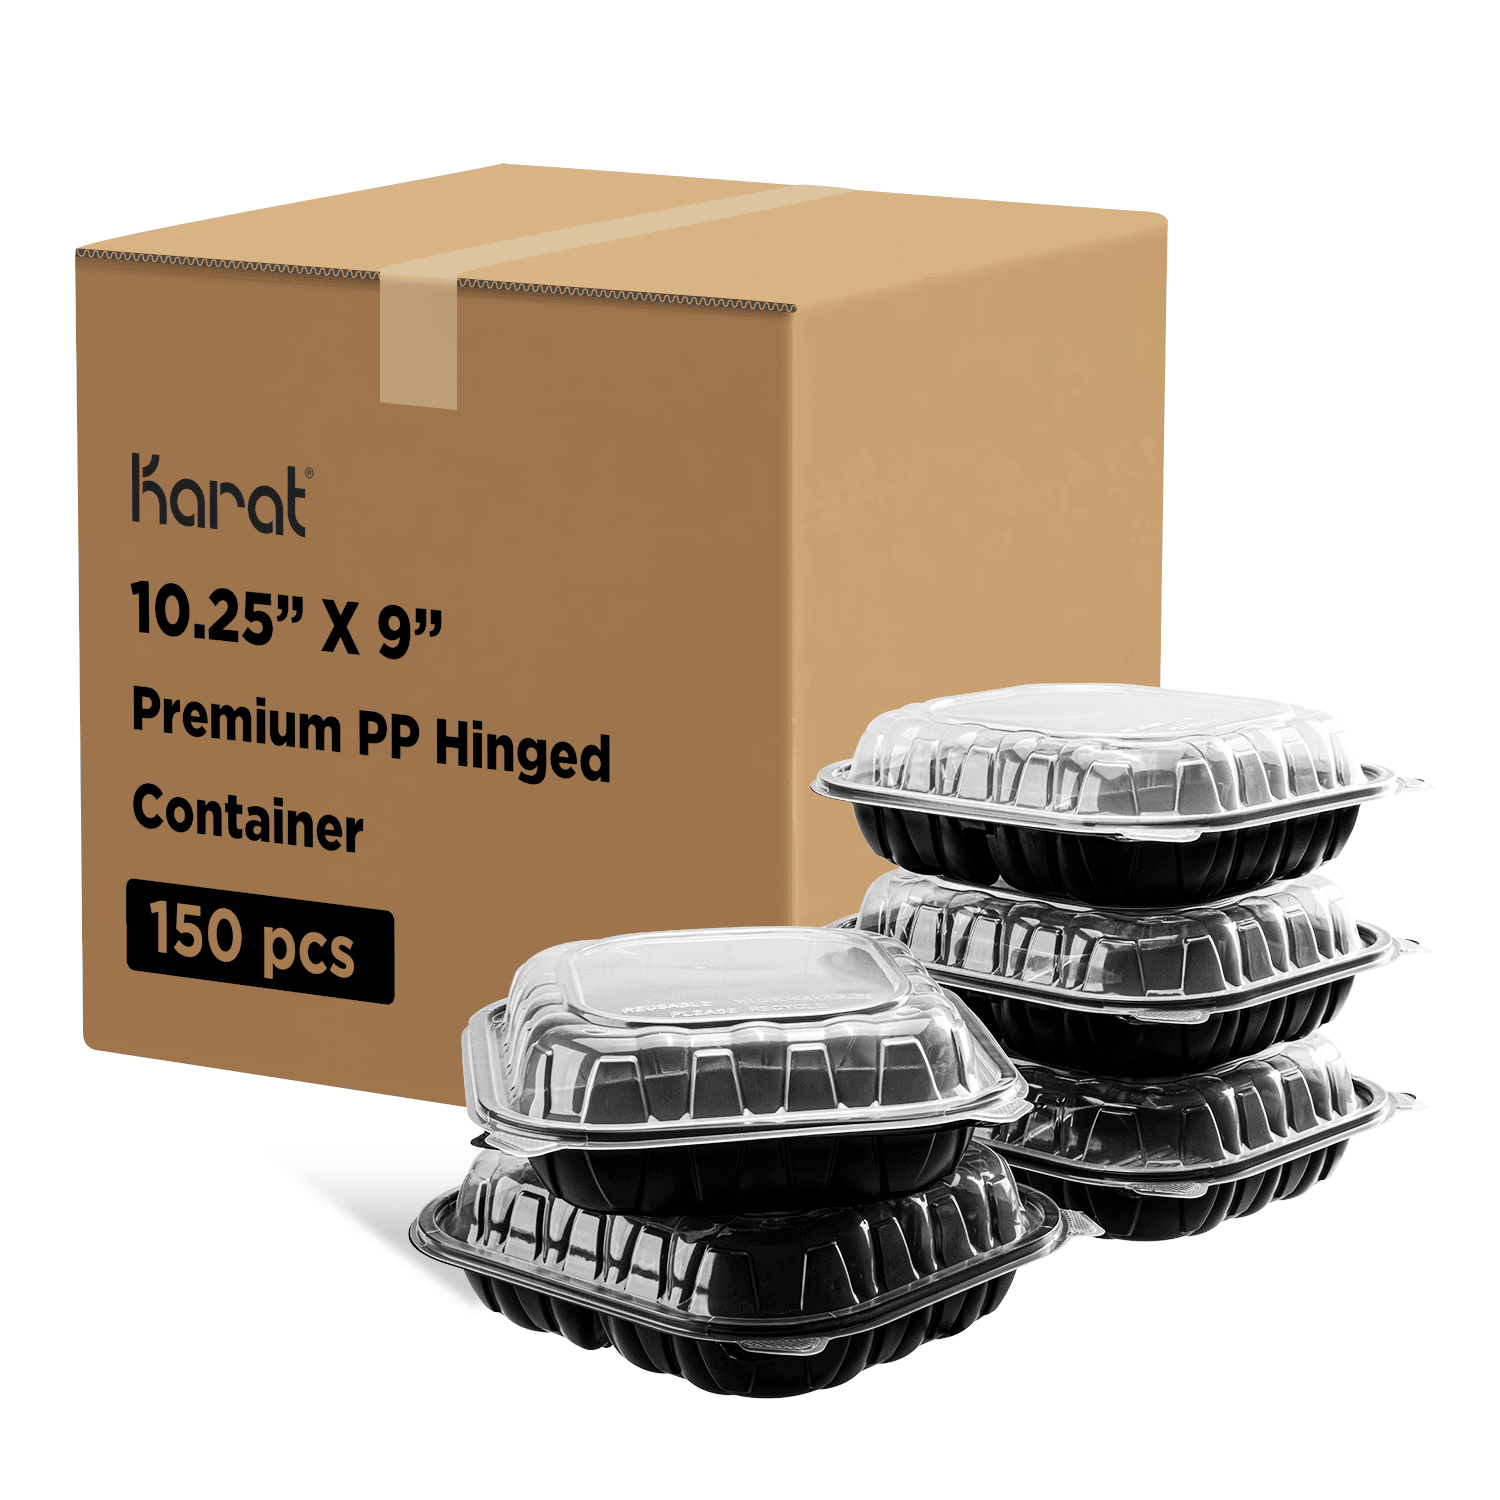 Karat 10.25"x 9" Premium PP Hinged Container stacked next to packaging